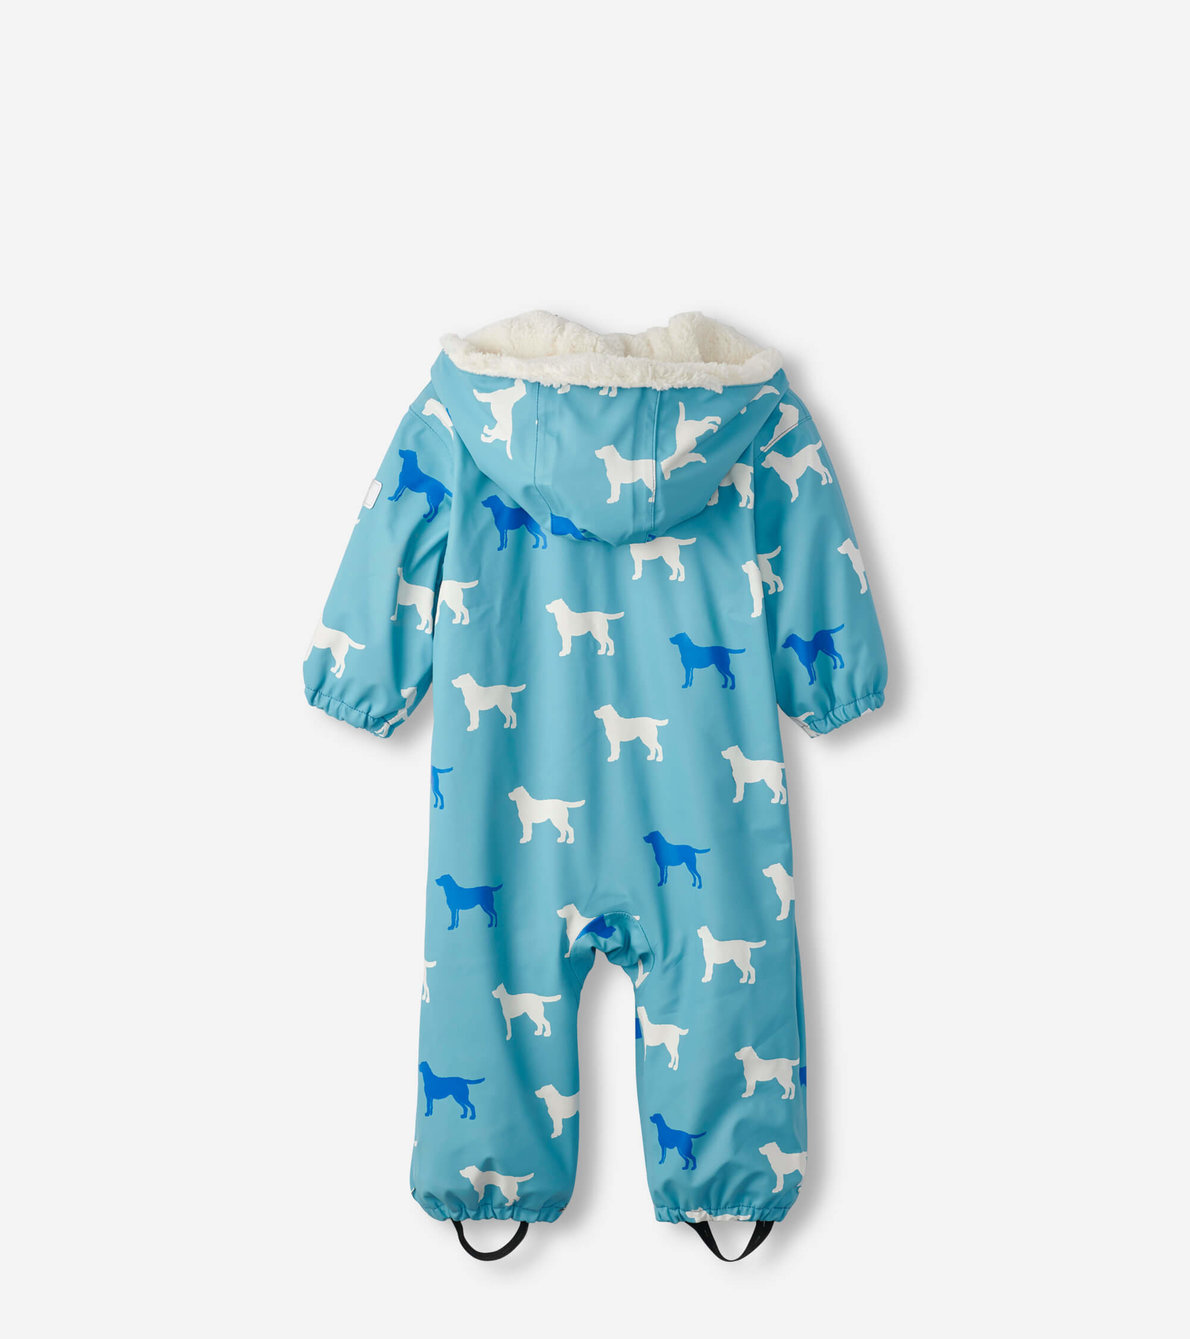 View larger image of Friendly Labs Sherpa Lined Colour Changing Baby Rain Suit